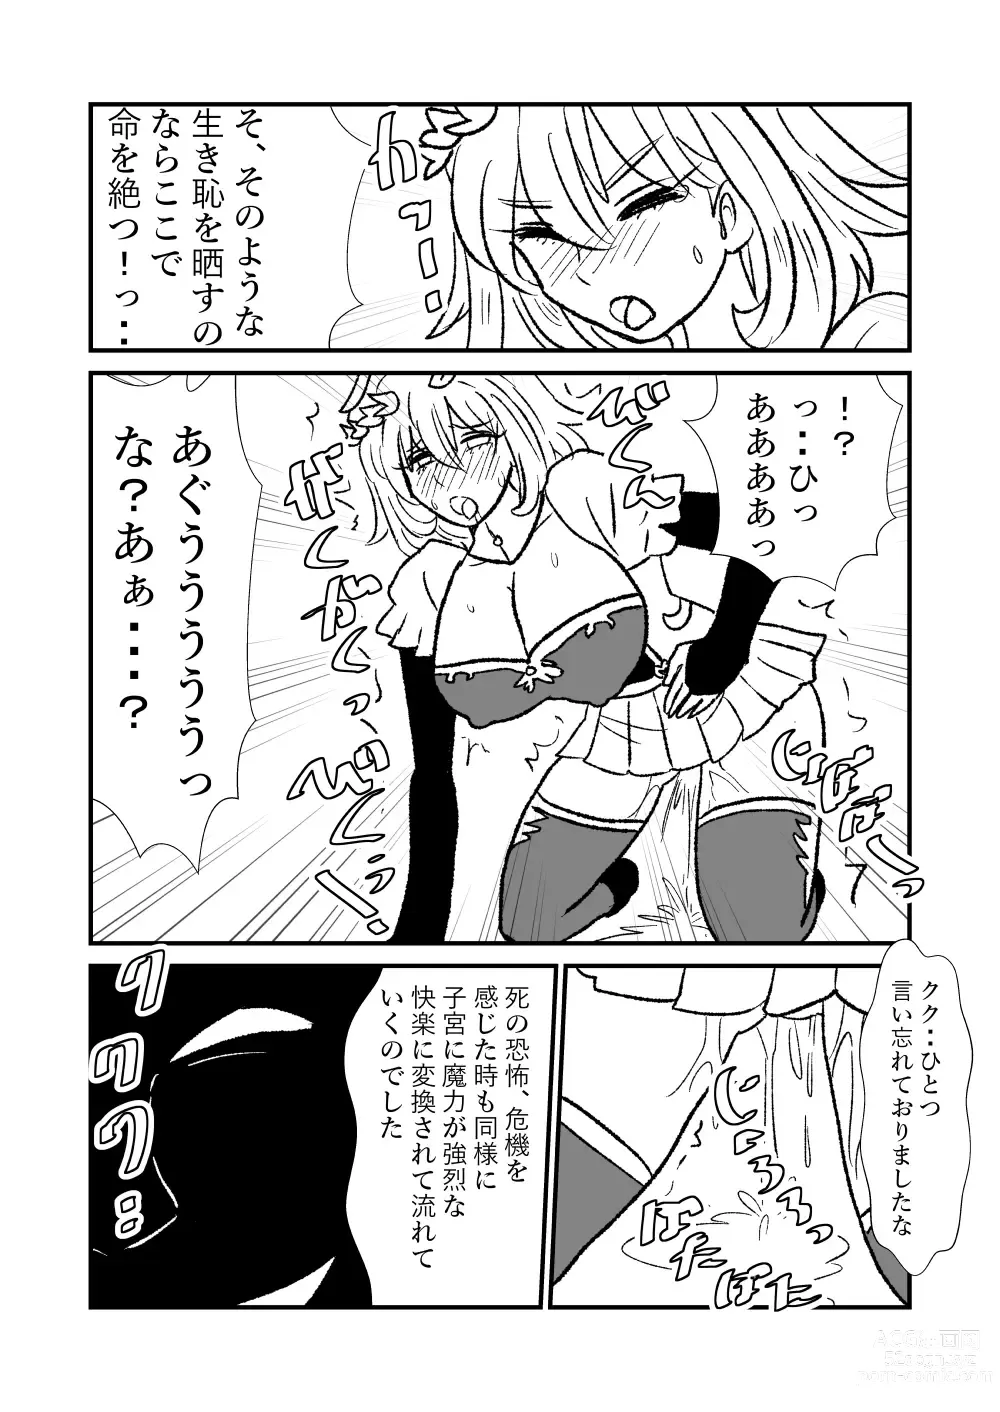 Page 8 of doujinshi Hime Kendo Cage